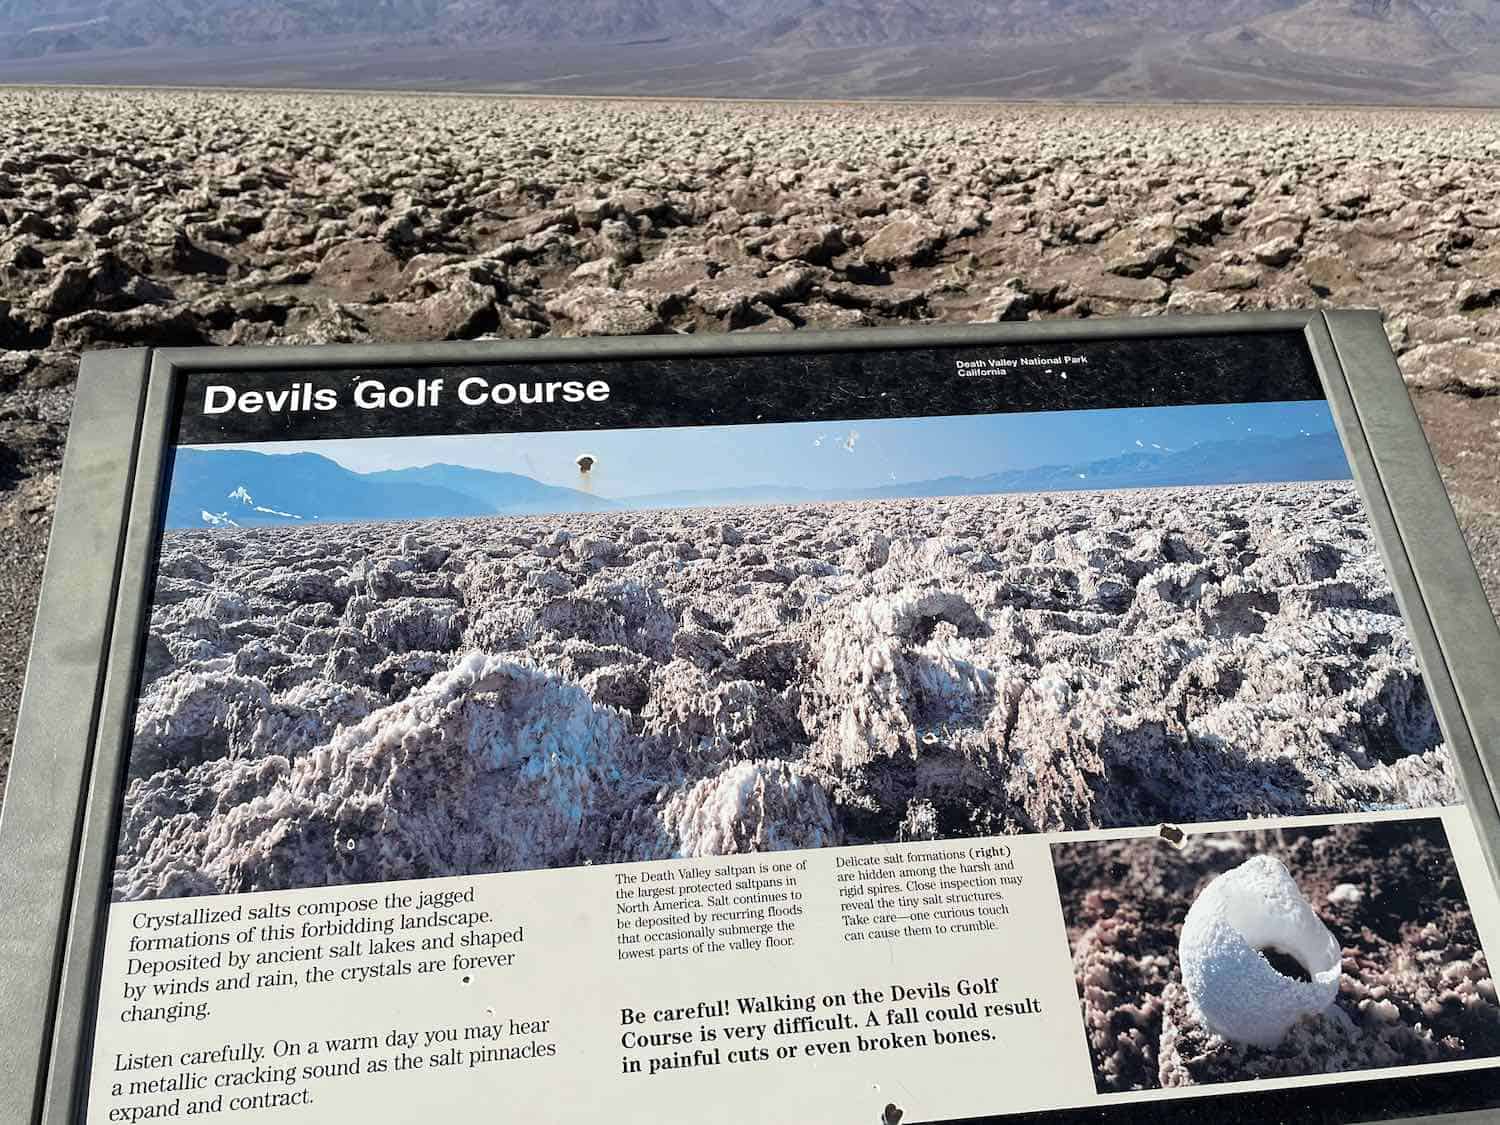 Signage explaining Devils Golf Course on a Death Valley 2 day trip.